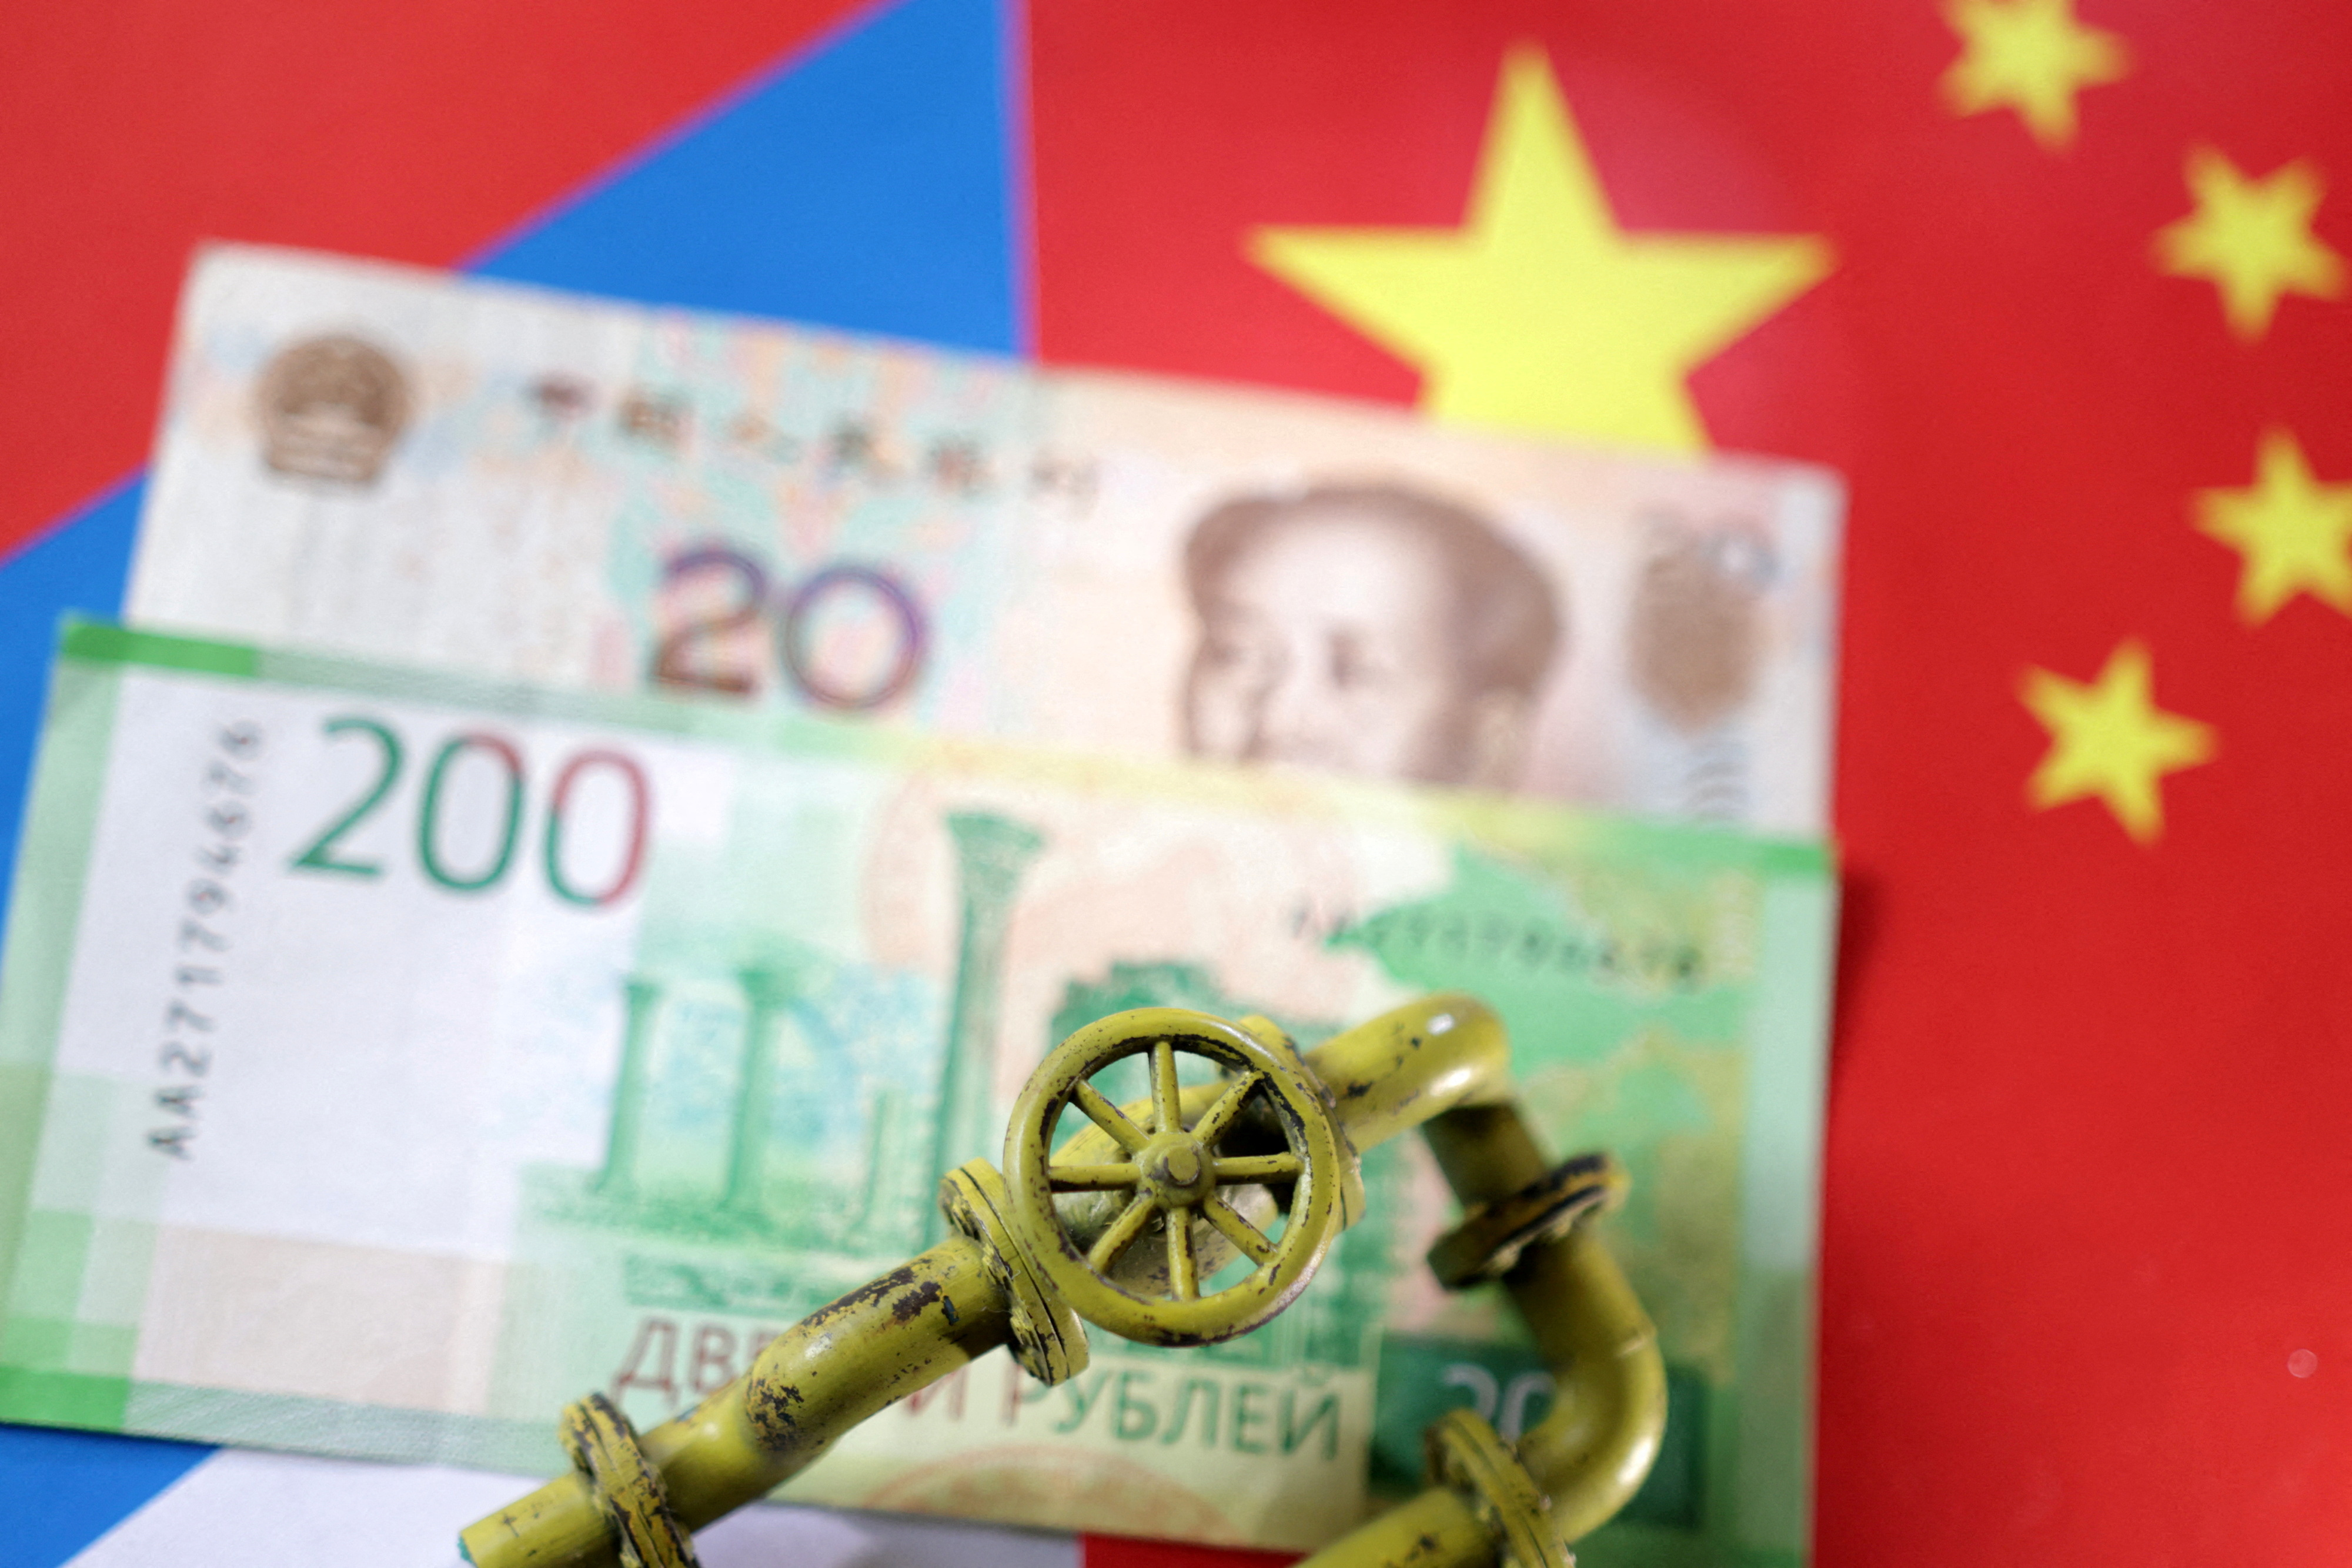 Illustration shows model of natural gas pipeline, Russian and Chinese flags and Yuan and Rouble banknotes